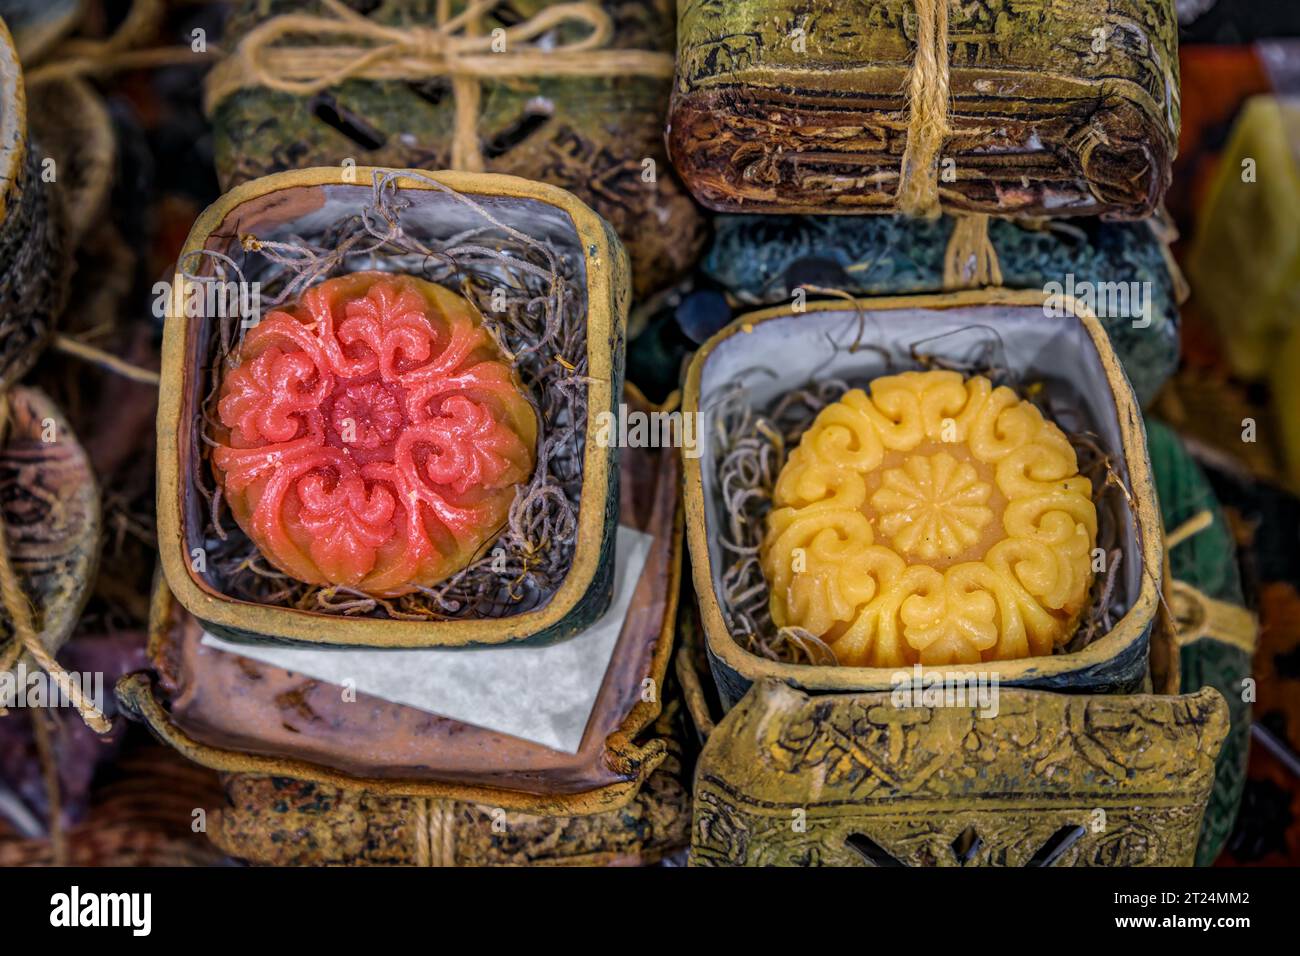 Selection of colorful natural scented soap at an Armenian culture festival, artisanal gift idea, San Francisco, California Stock Photo